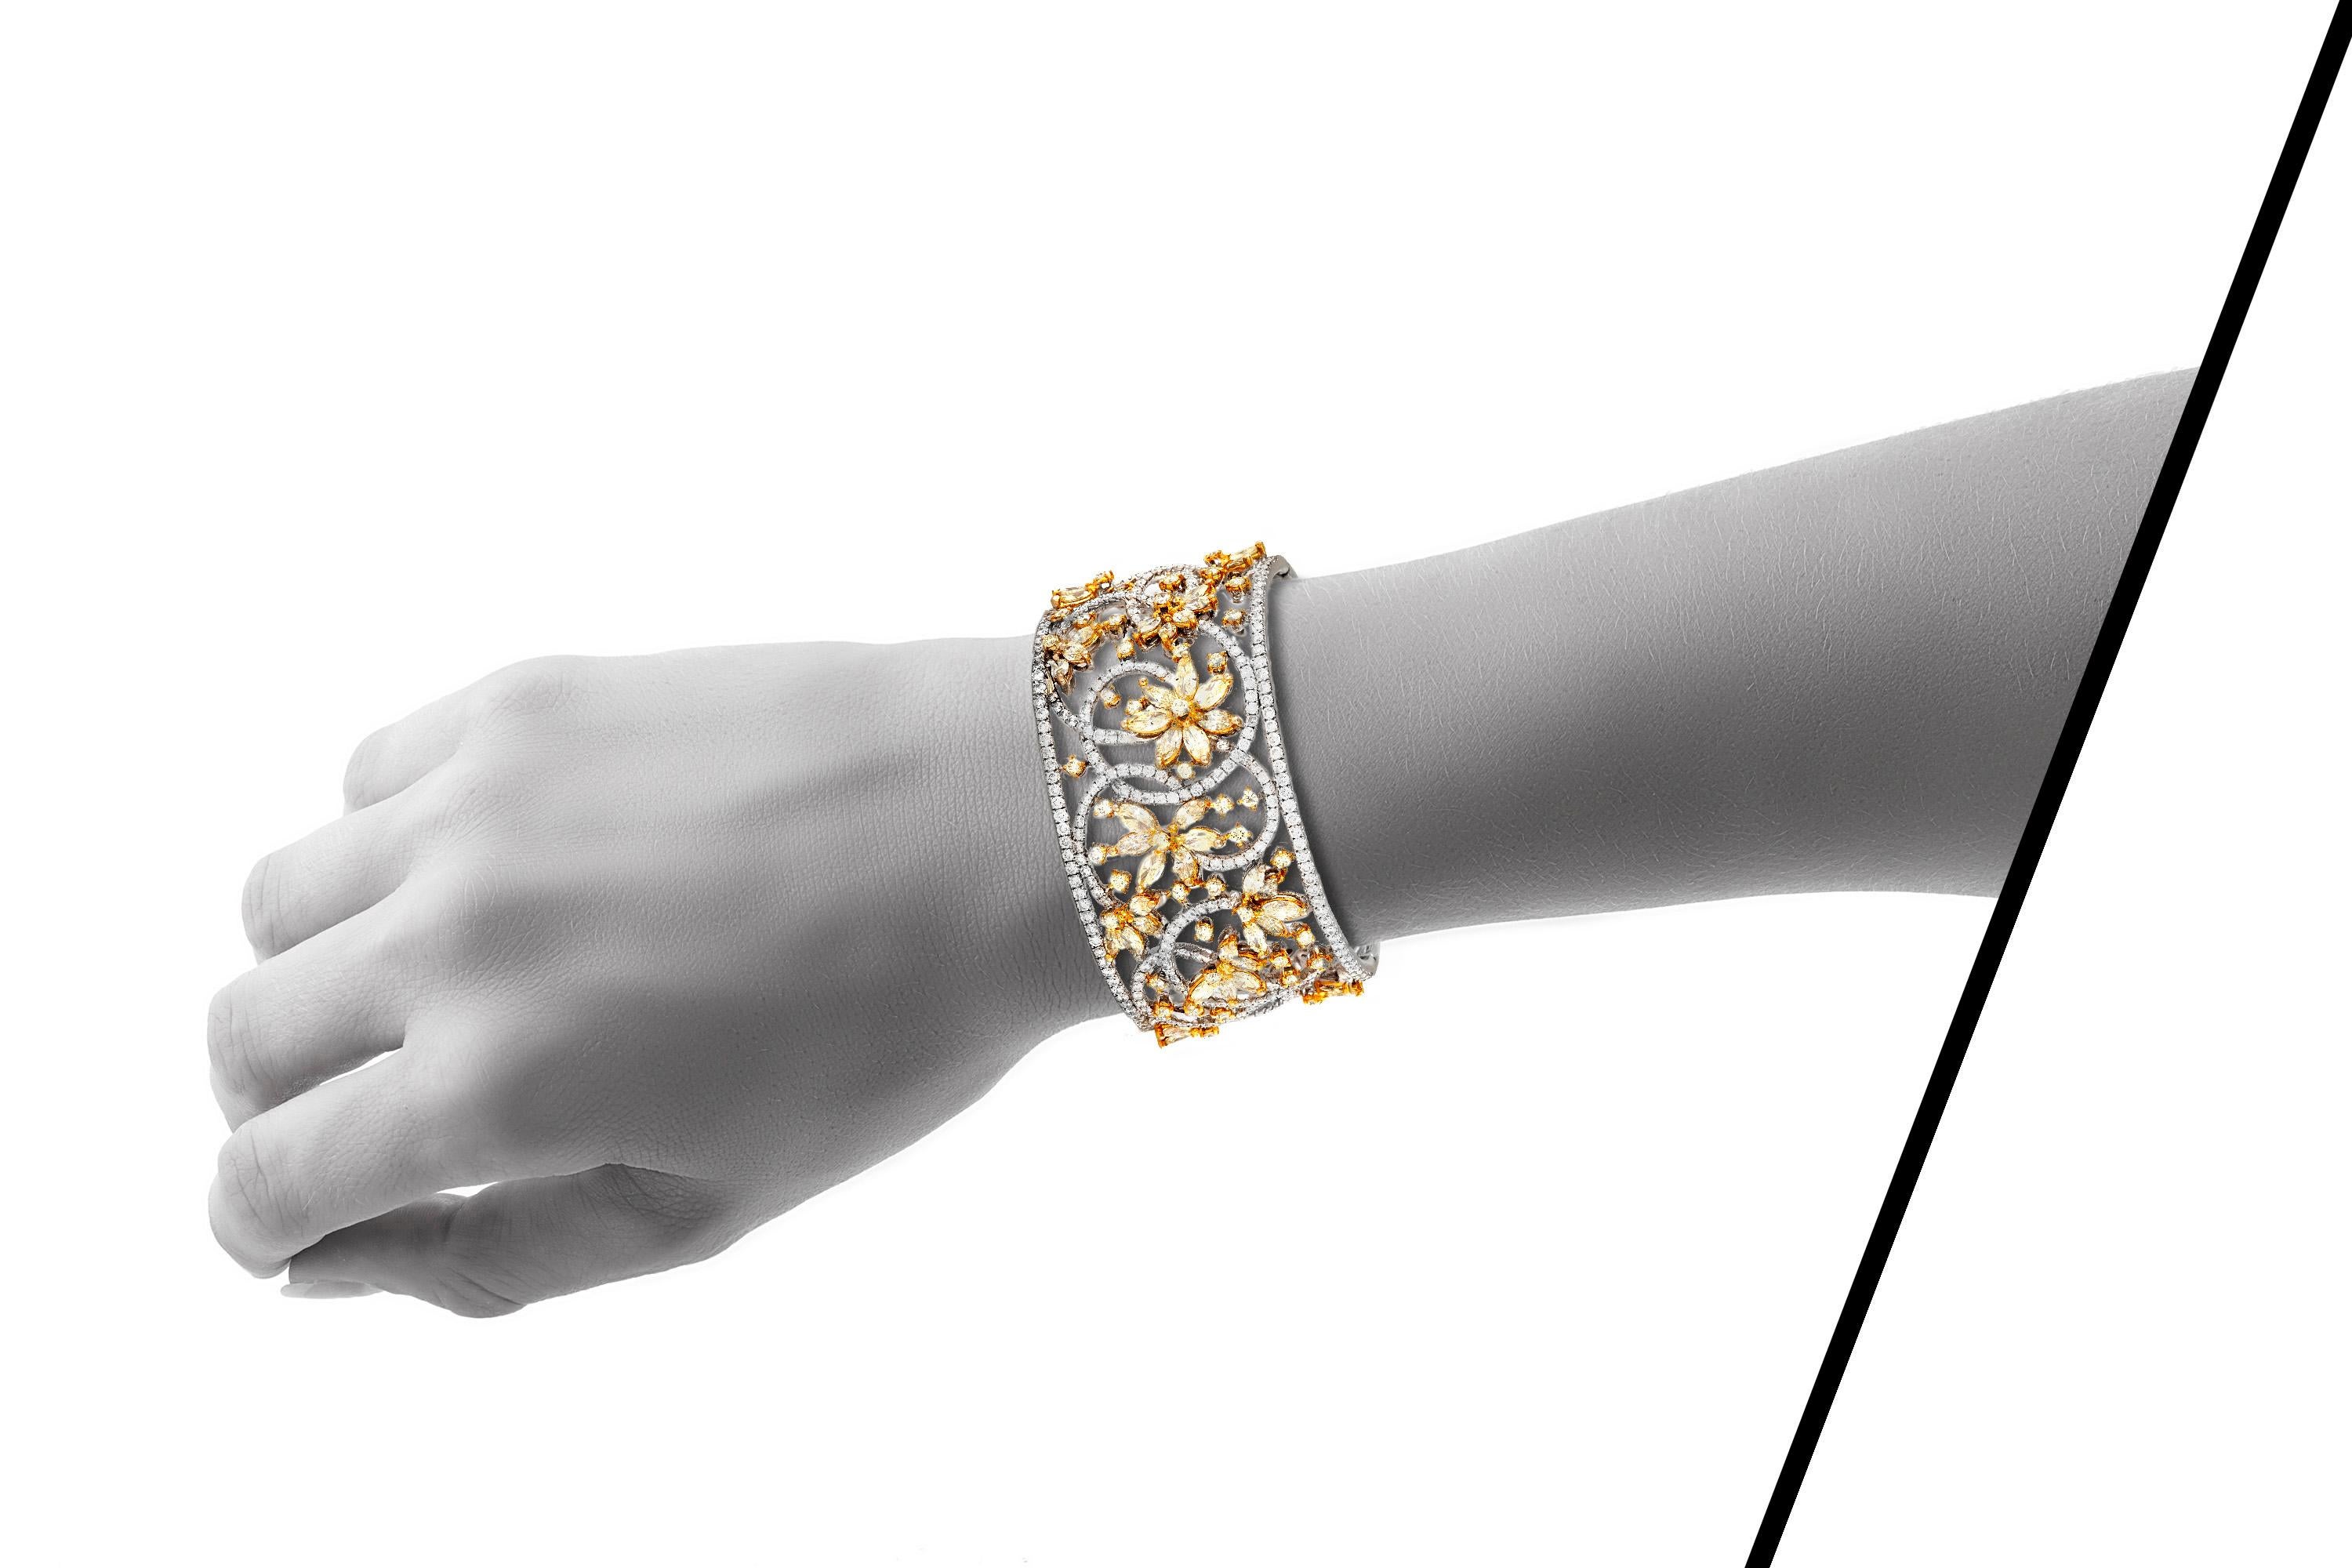 Cuff bracelet, finely crafted in 18 k white gold with marquise and brilliant cut, fancy yellow diamonds and white brilliant cut diamonds, weighing a total of approximately 13.30 carats.